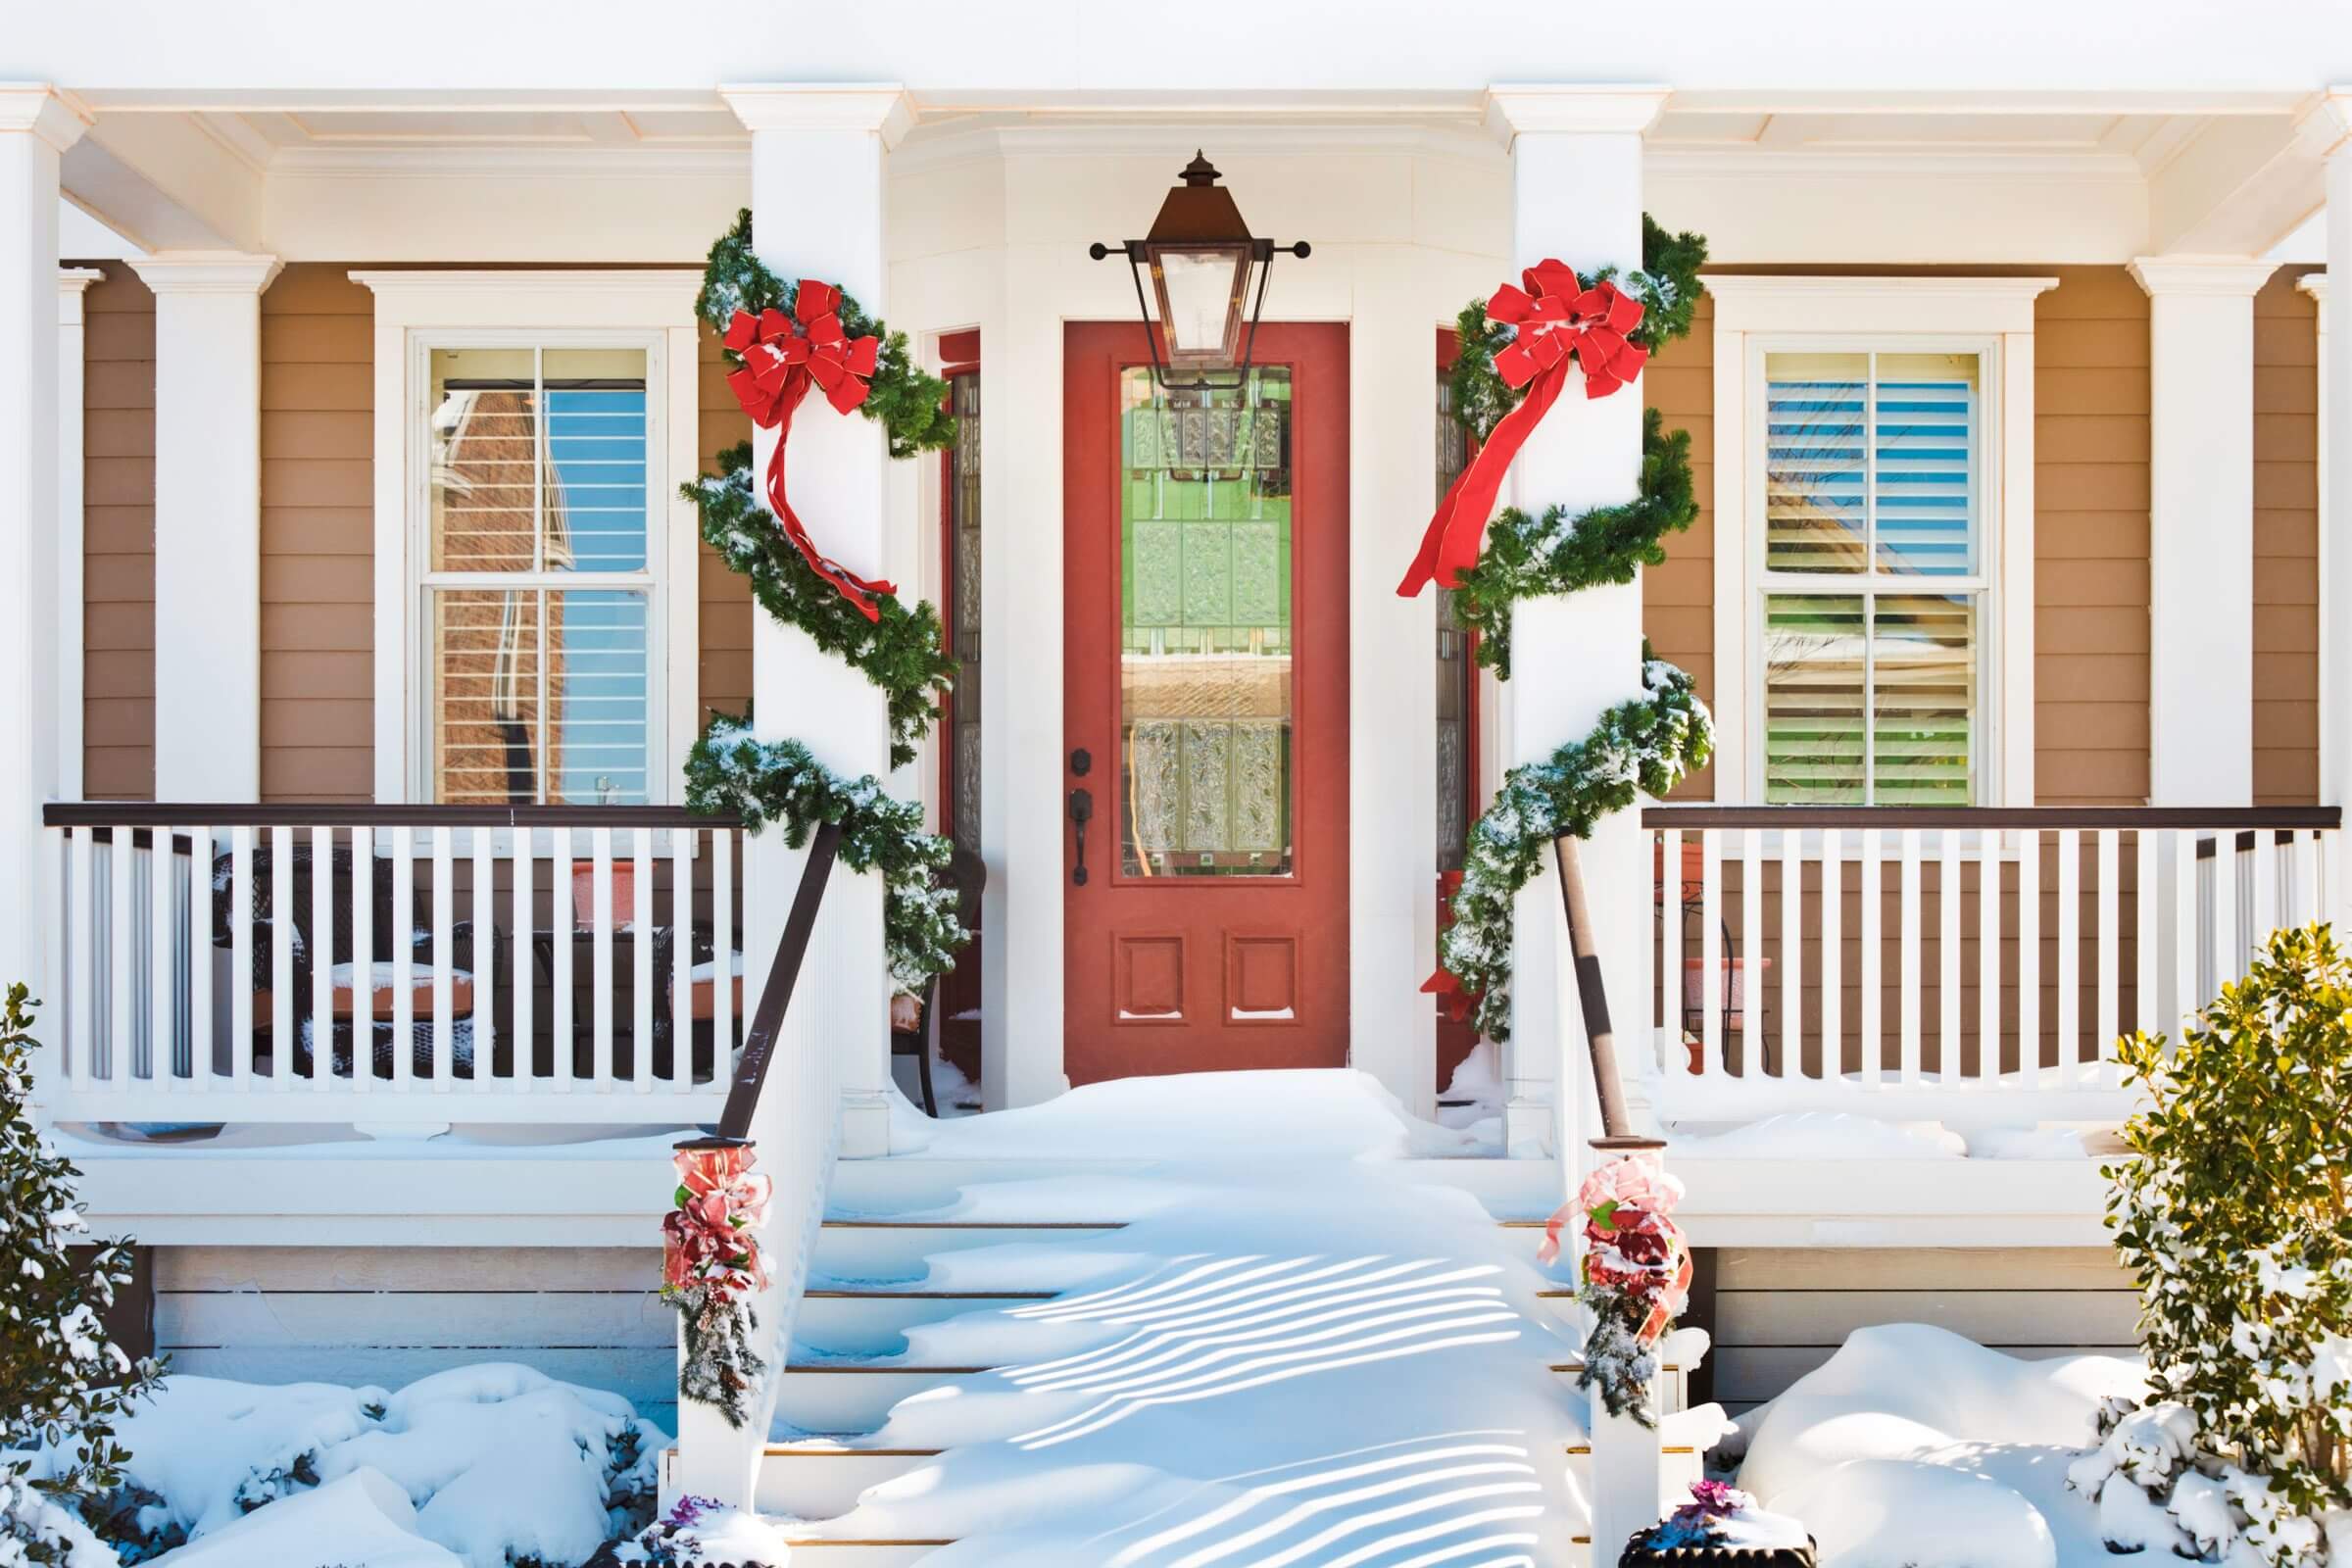 Beautify your front porch with 43 amazing winter decorating ideas - 319